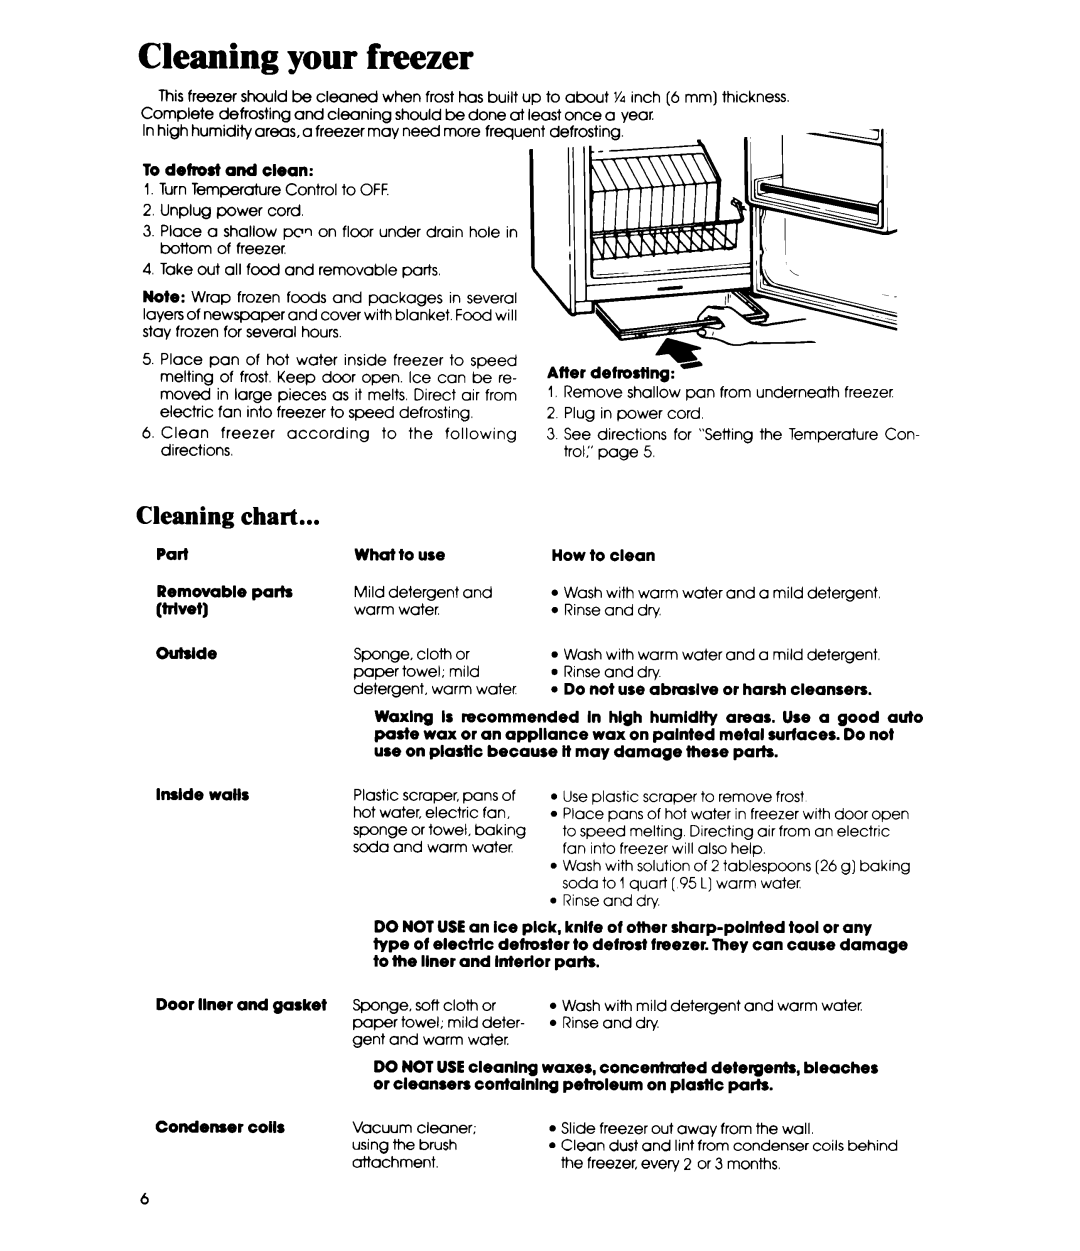 Whirlpool EV130C manual Cleaning your freezer, chart 